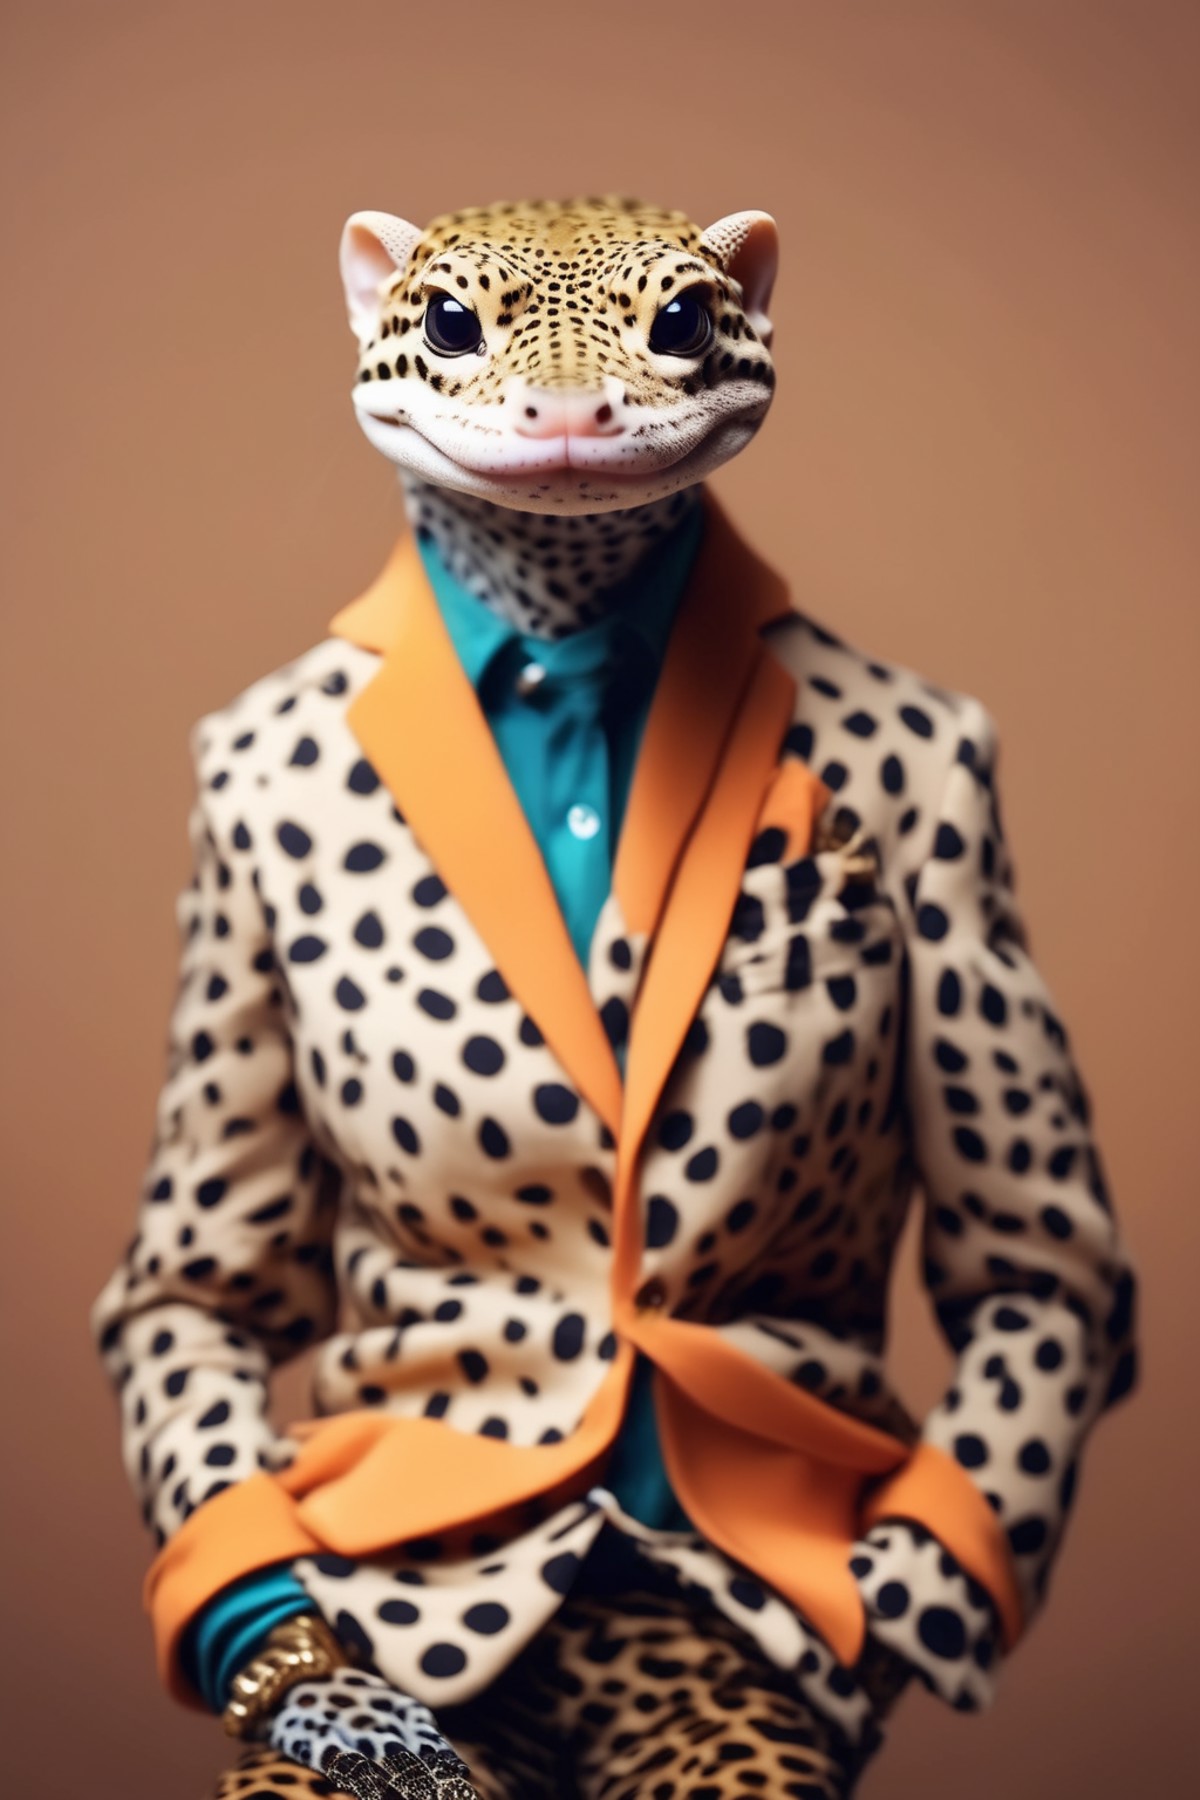 <lora:Dressed animals:1>Dressed animals - im not actually a person im just a leopard gekko pretending to be a person